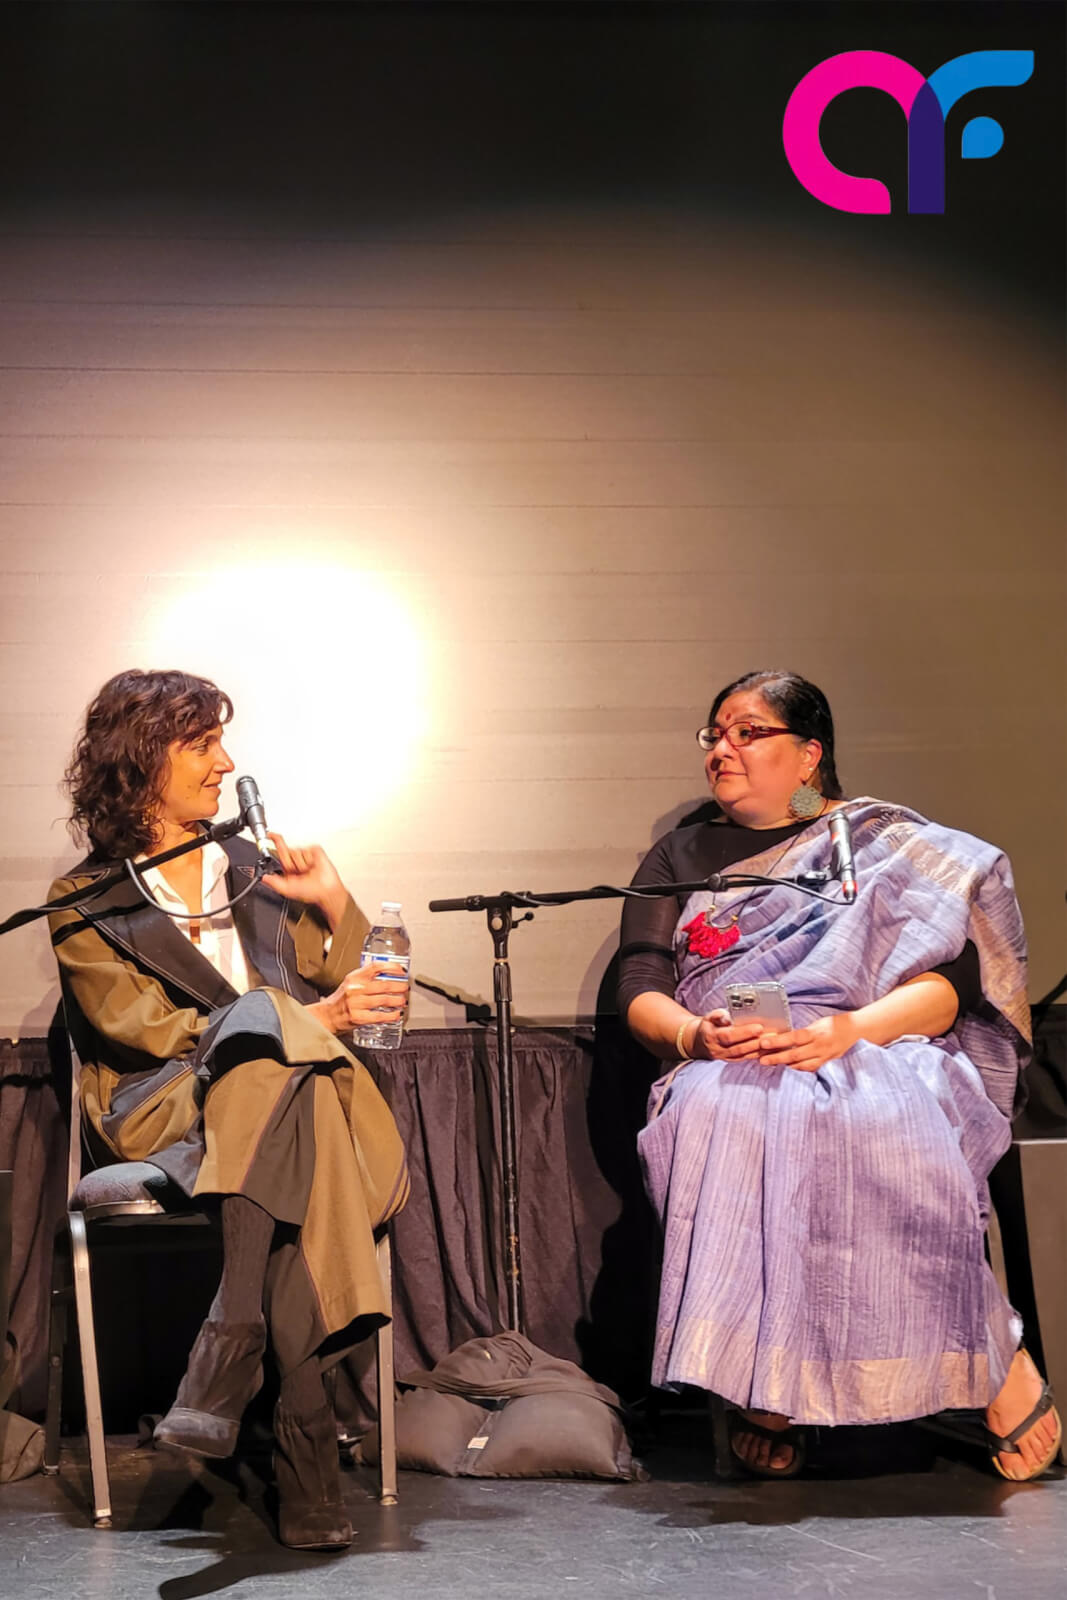 Highlights From The South Asian Literature And Arts Festival (SALA):